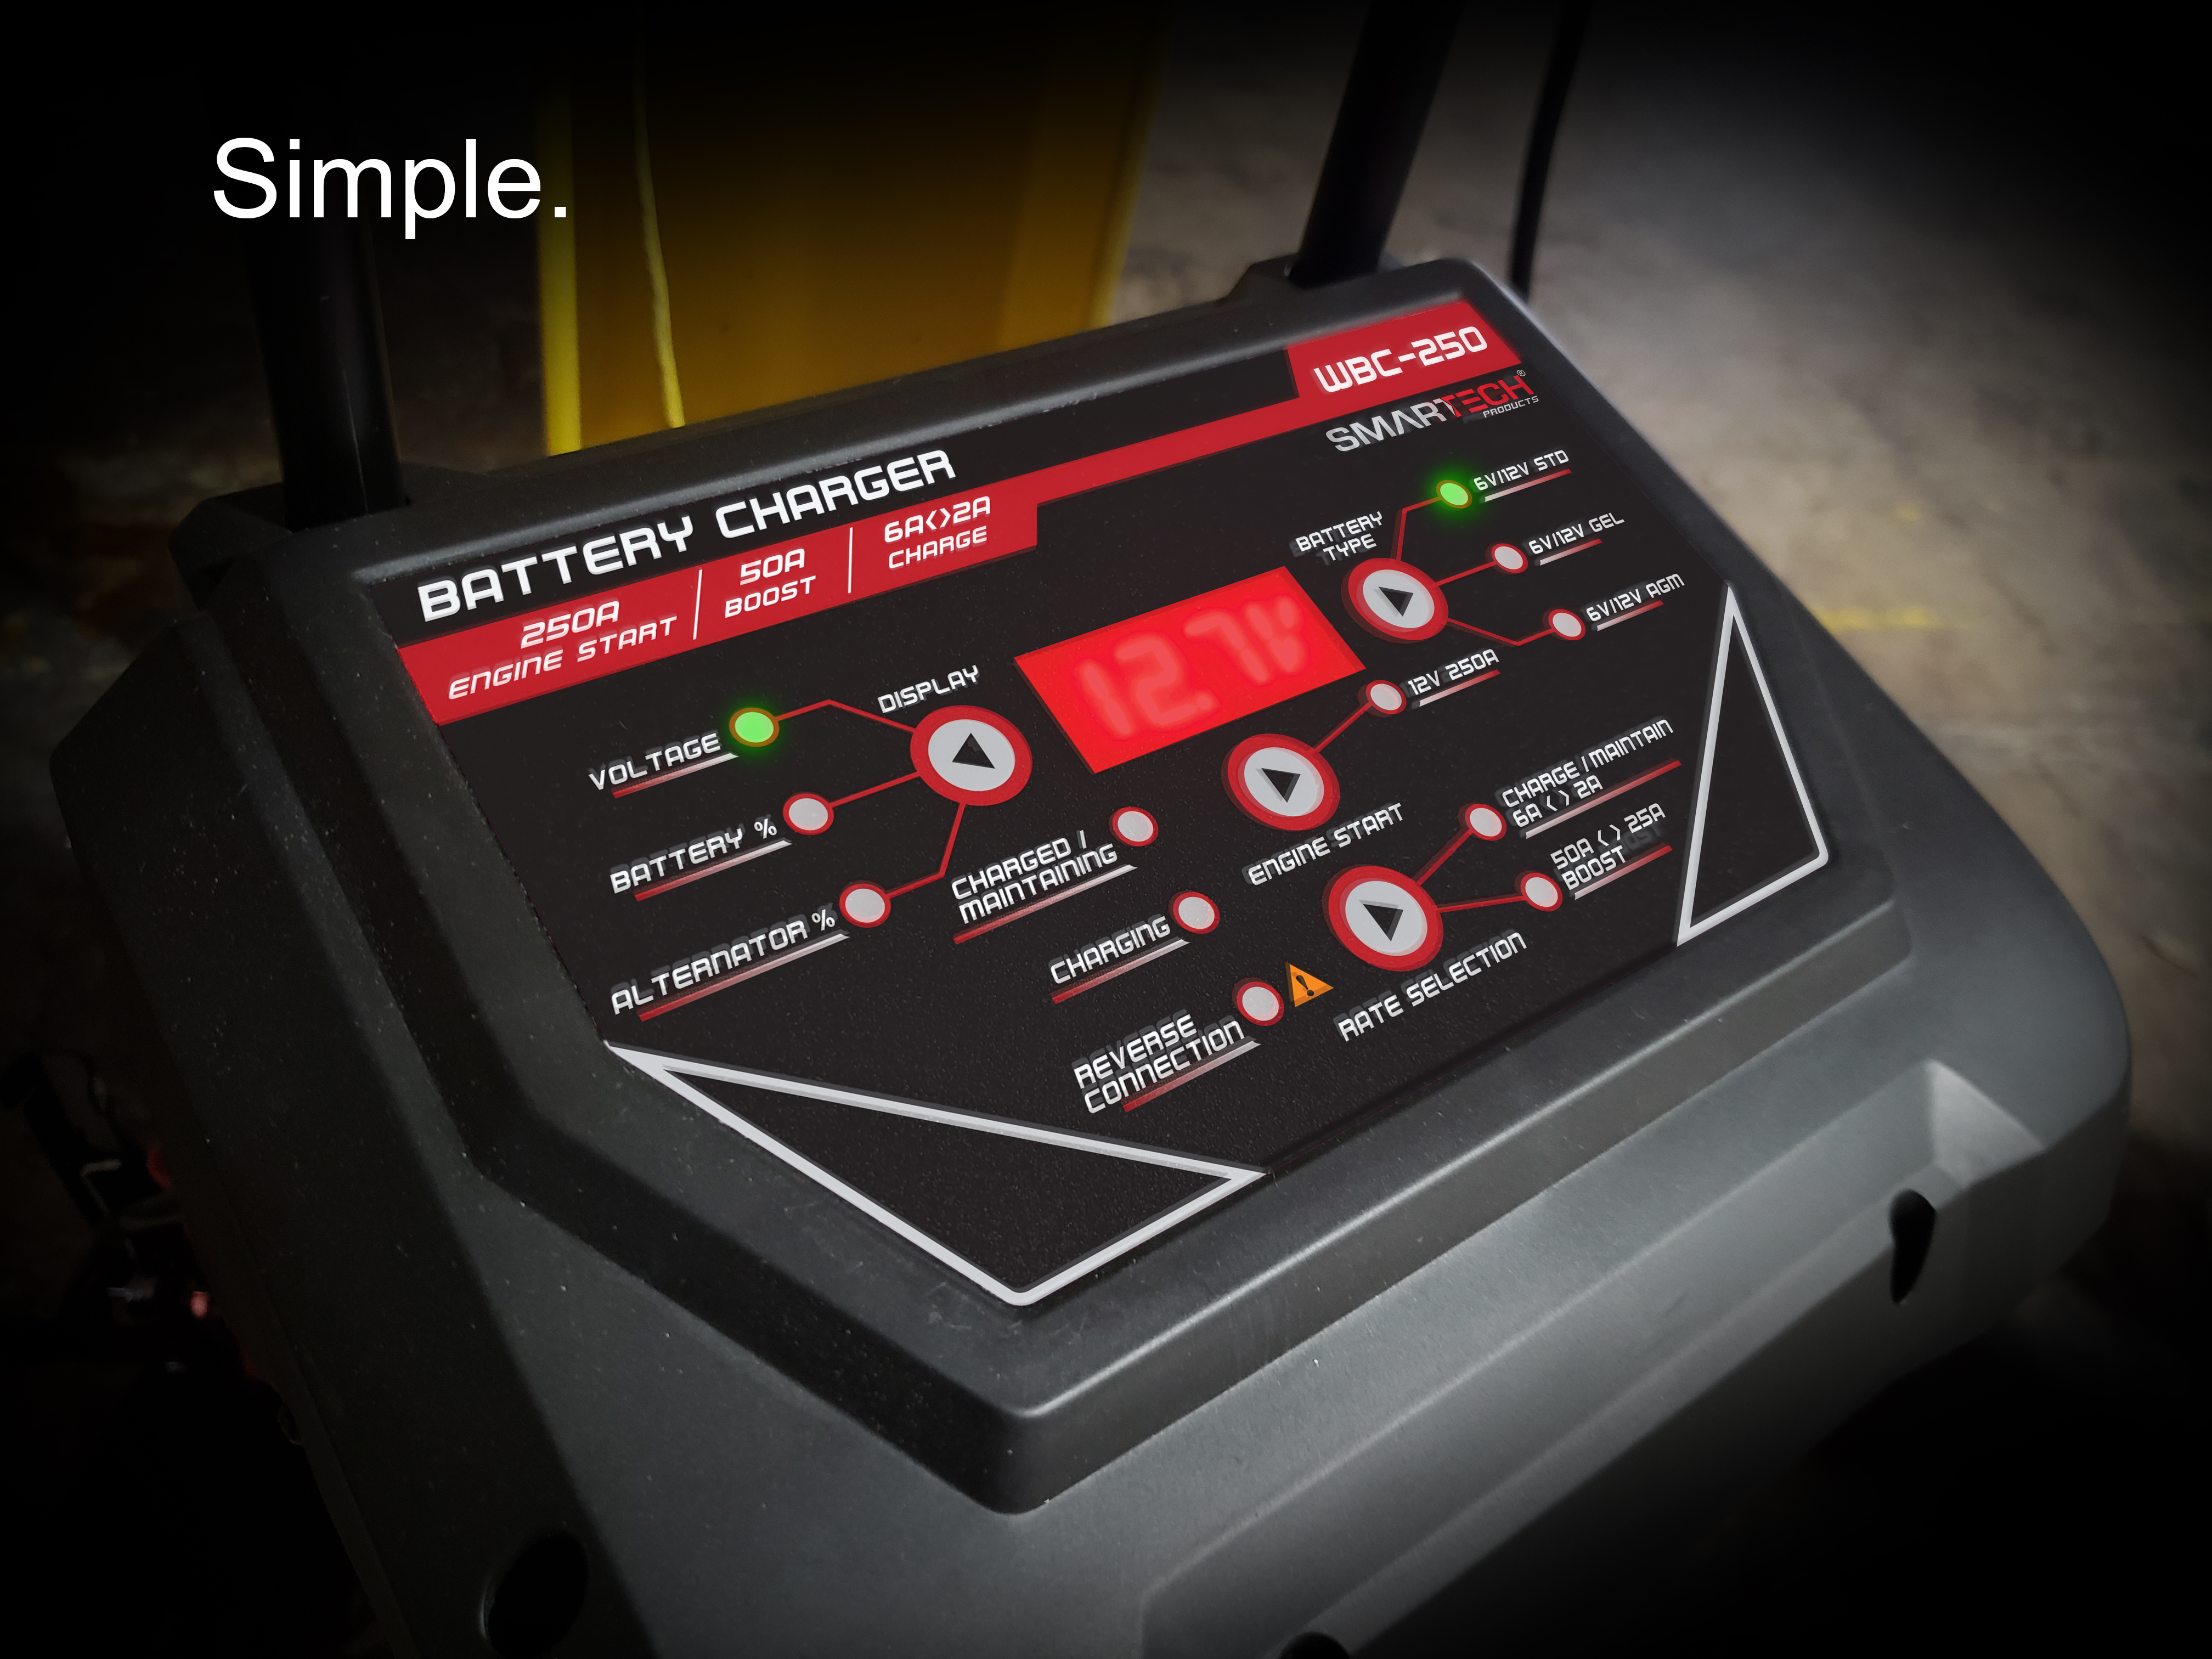 Smartech 250 Wheel Charger that is easy to read.